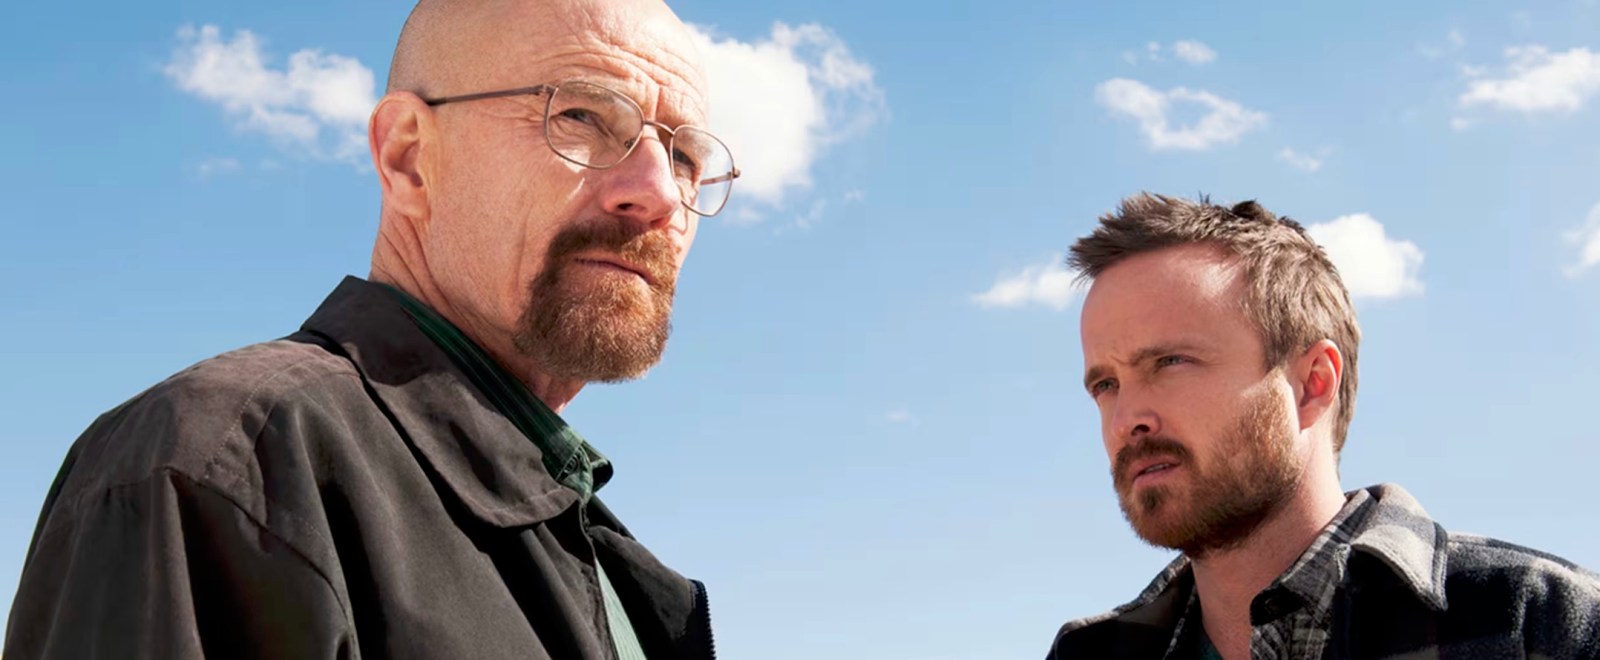 Don’t Fall For The Fake ‘Breaking Bad’ Movie, ‘Heisenberg,’ That’s Taking Over Facebook